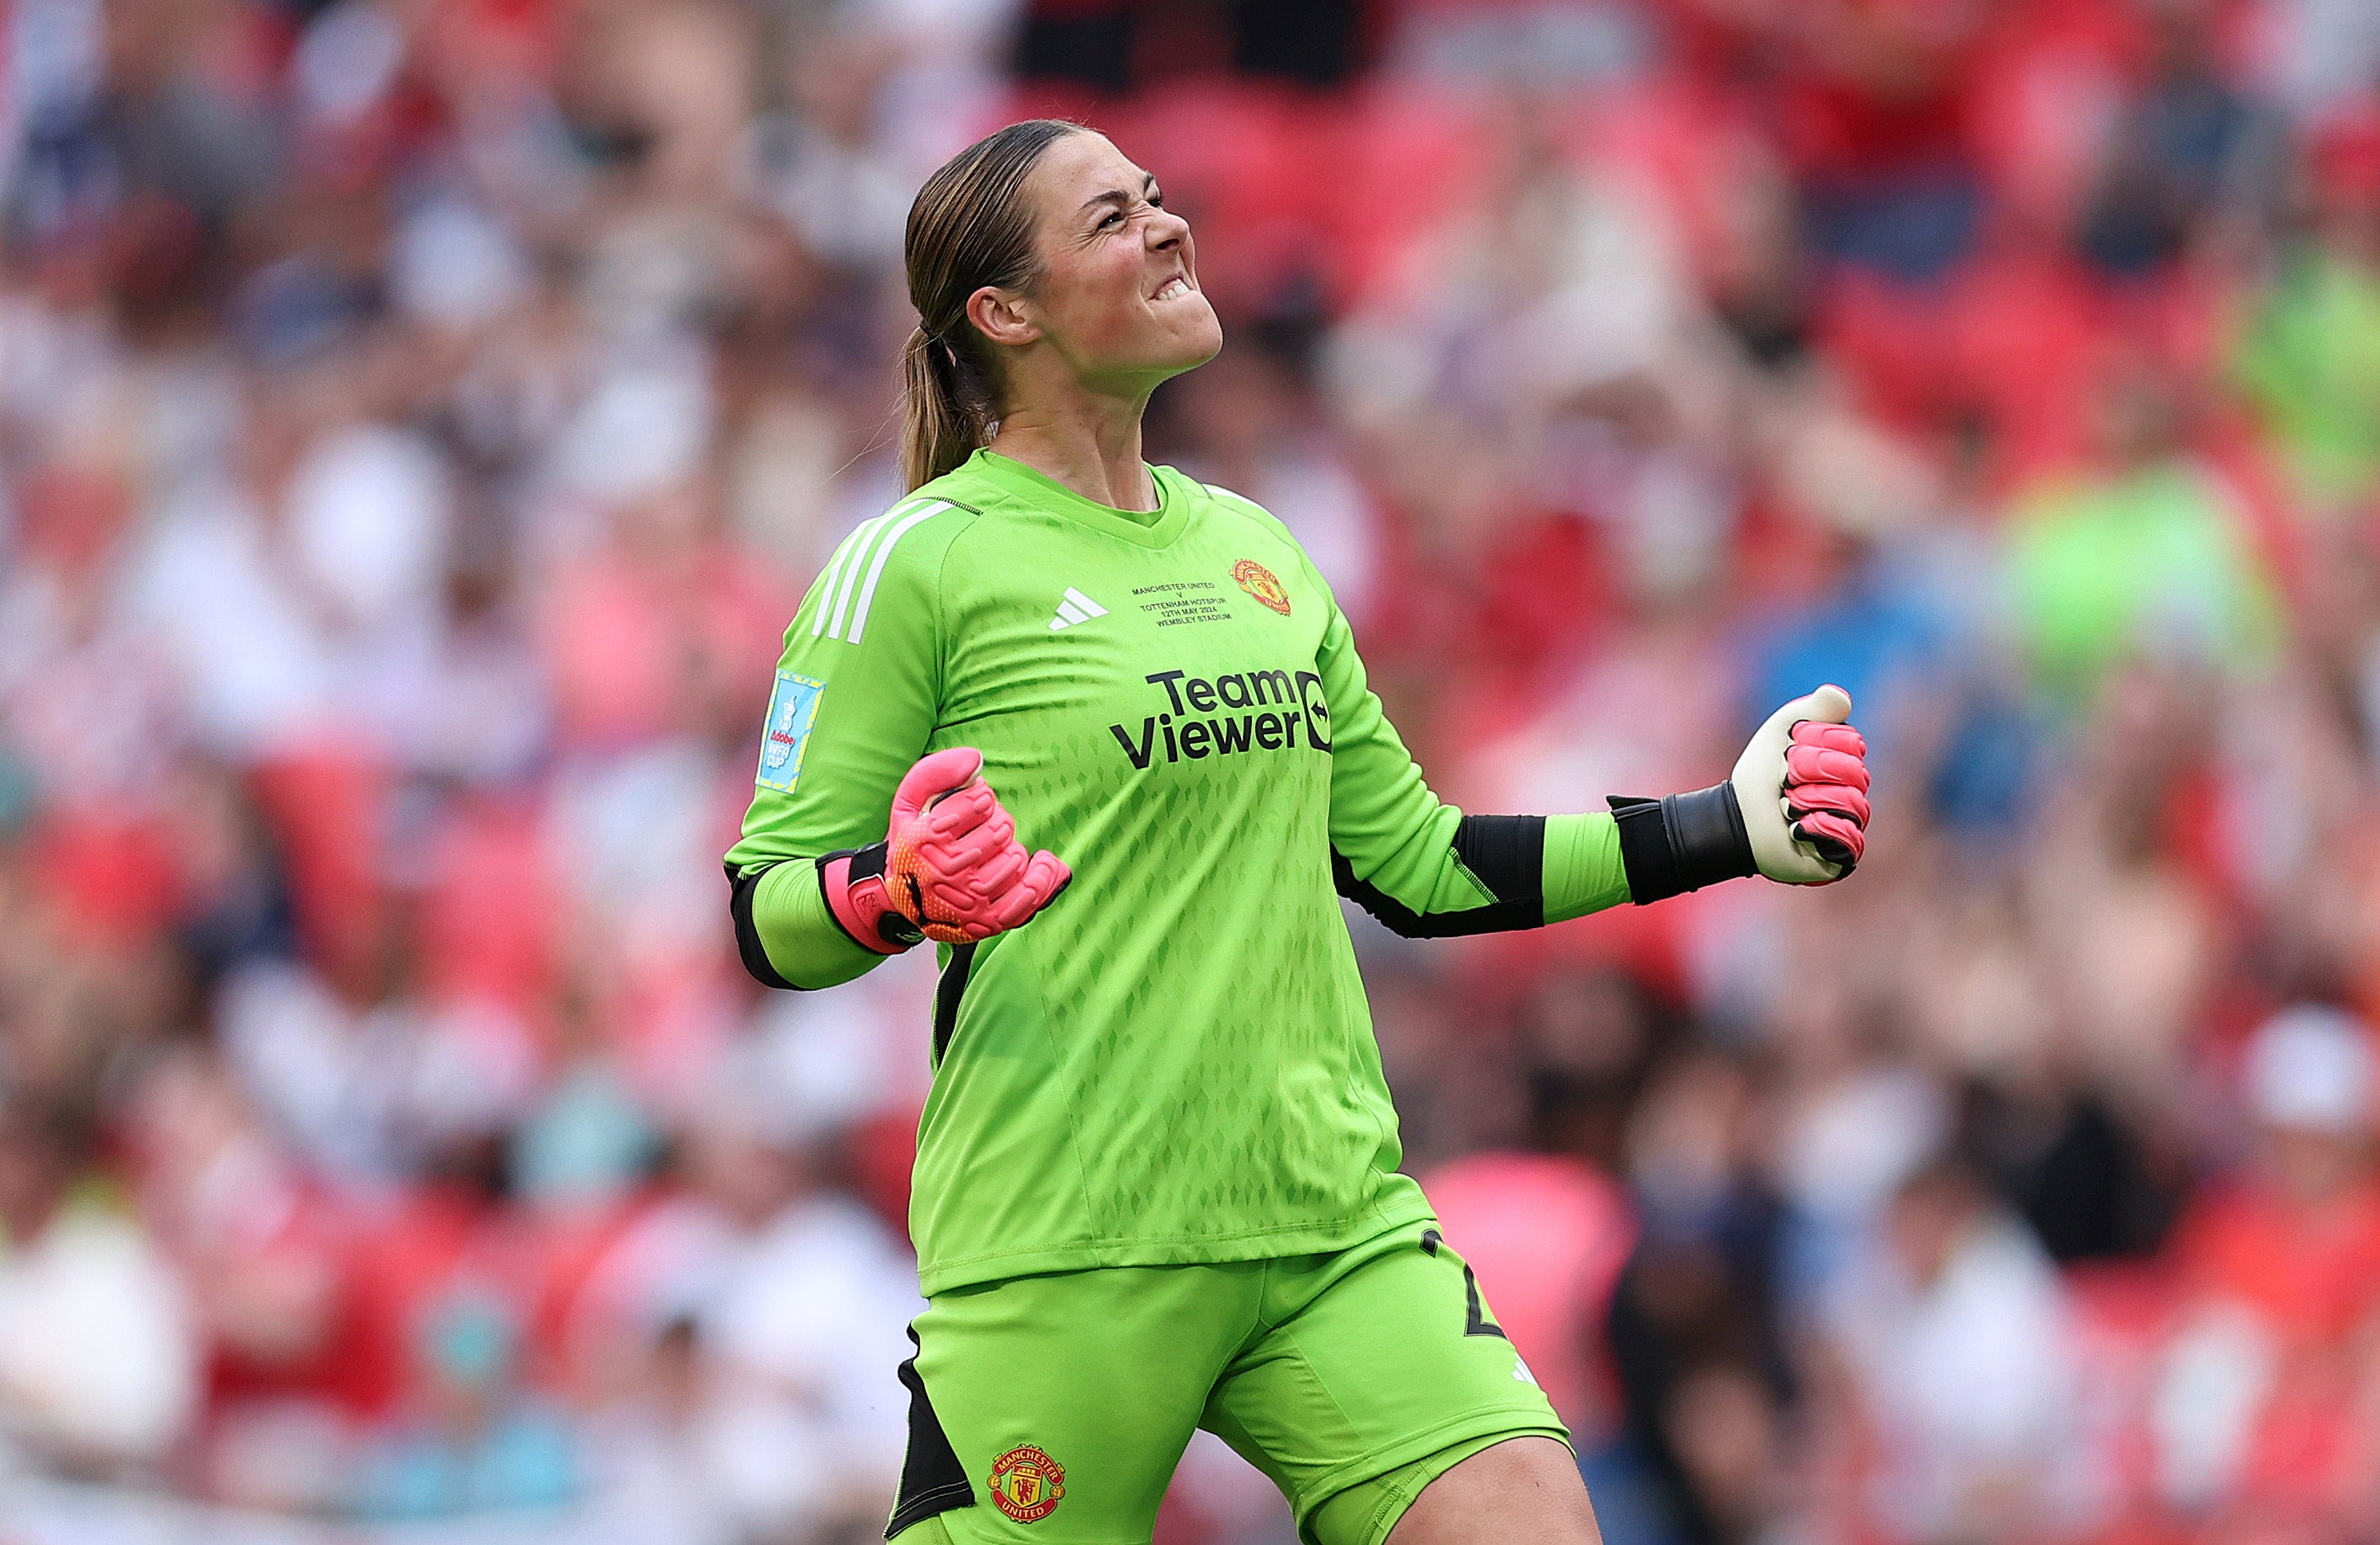 Mary Earps kept a clean sheet as Manchester United won the Women’s FA Cup 4-0 against Tottenham